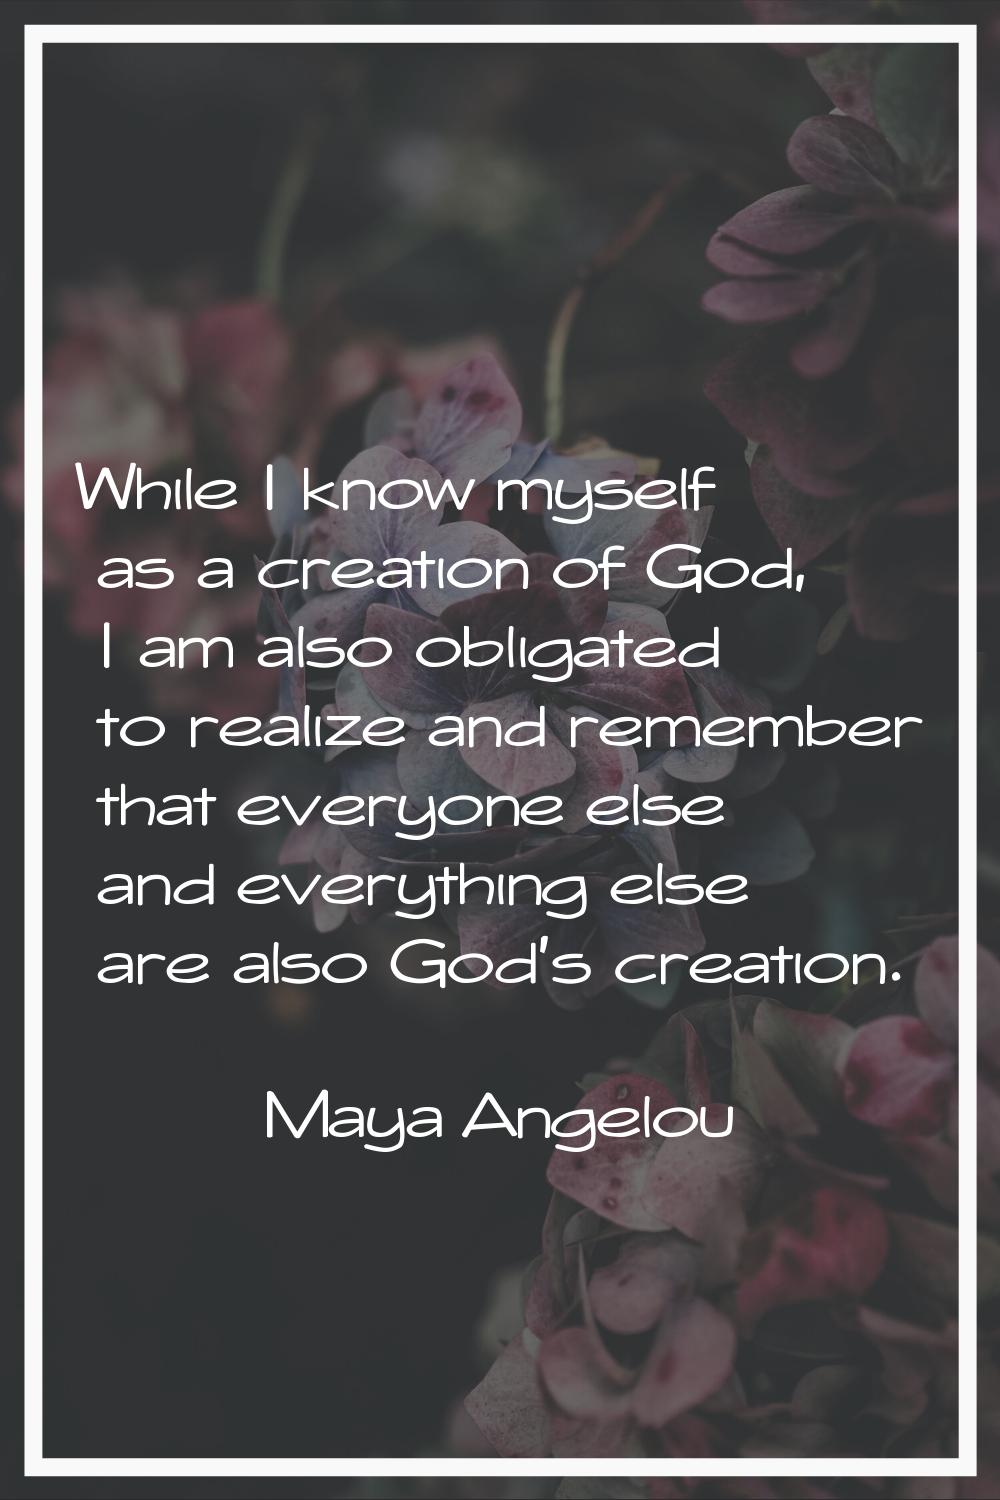 While I know myself as a creation of God, I am also obligated to realize and remember that everyone